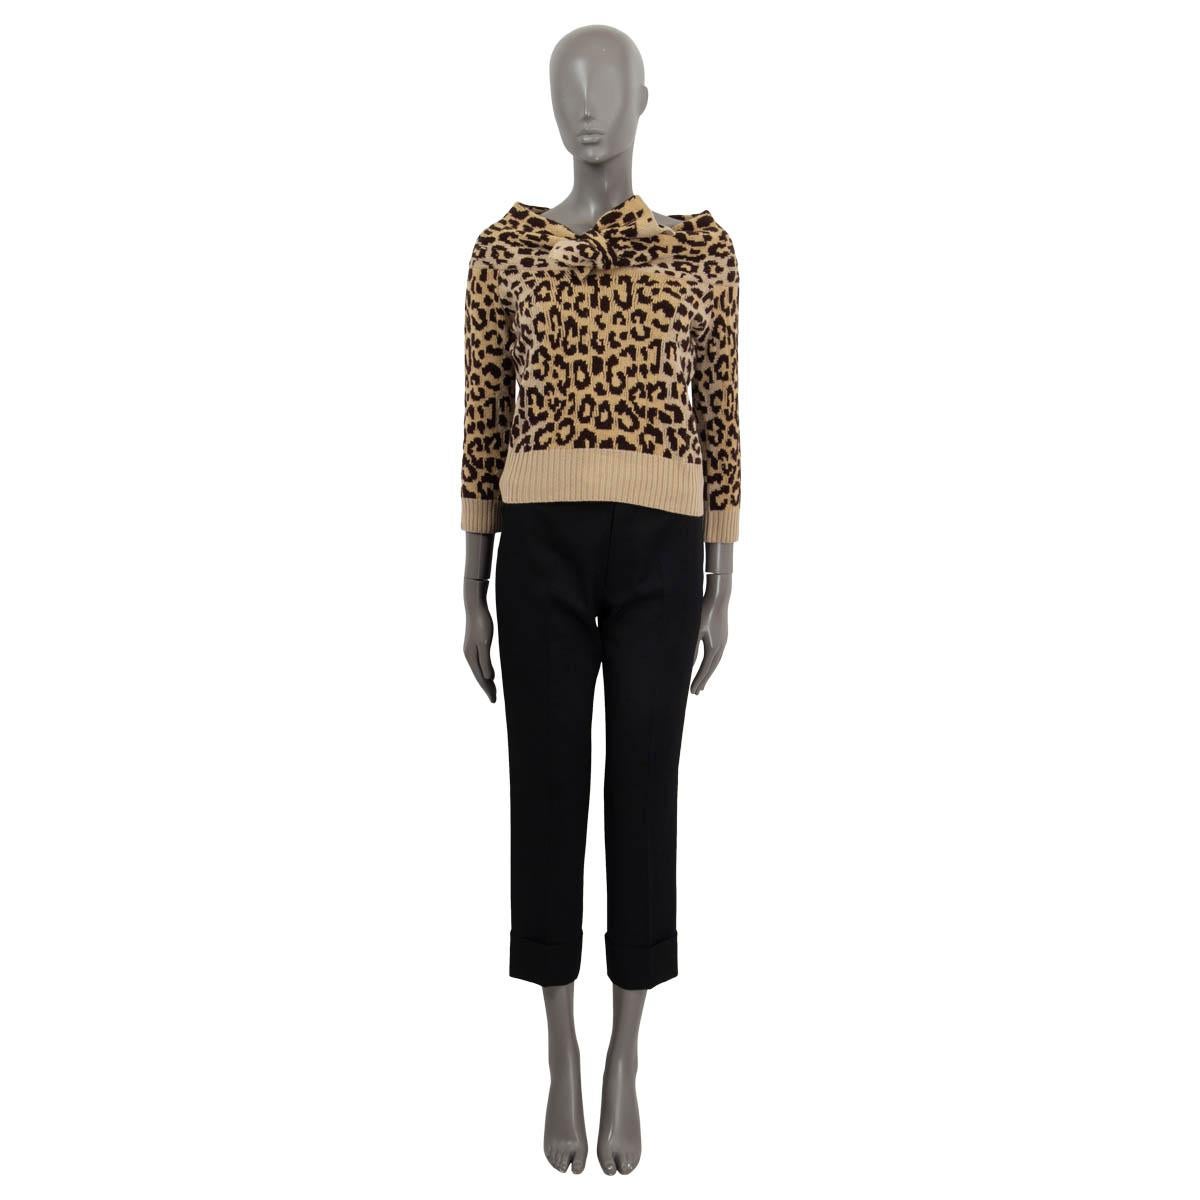 100% authentic Christian Dior bow embellished knit sweater in brown and camel cashmere (100%). Features a boat neck and 3/4 sleeves. Unlined. Has been worn and is in excellent condition.

Measurements
Tag Size	38
Size	S
Bust	90cm (35.1in) to 110cm